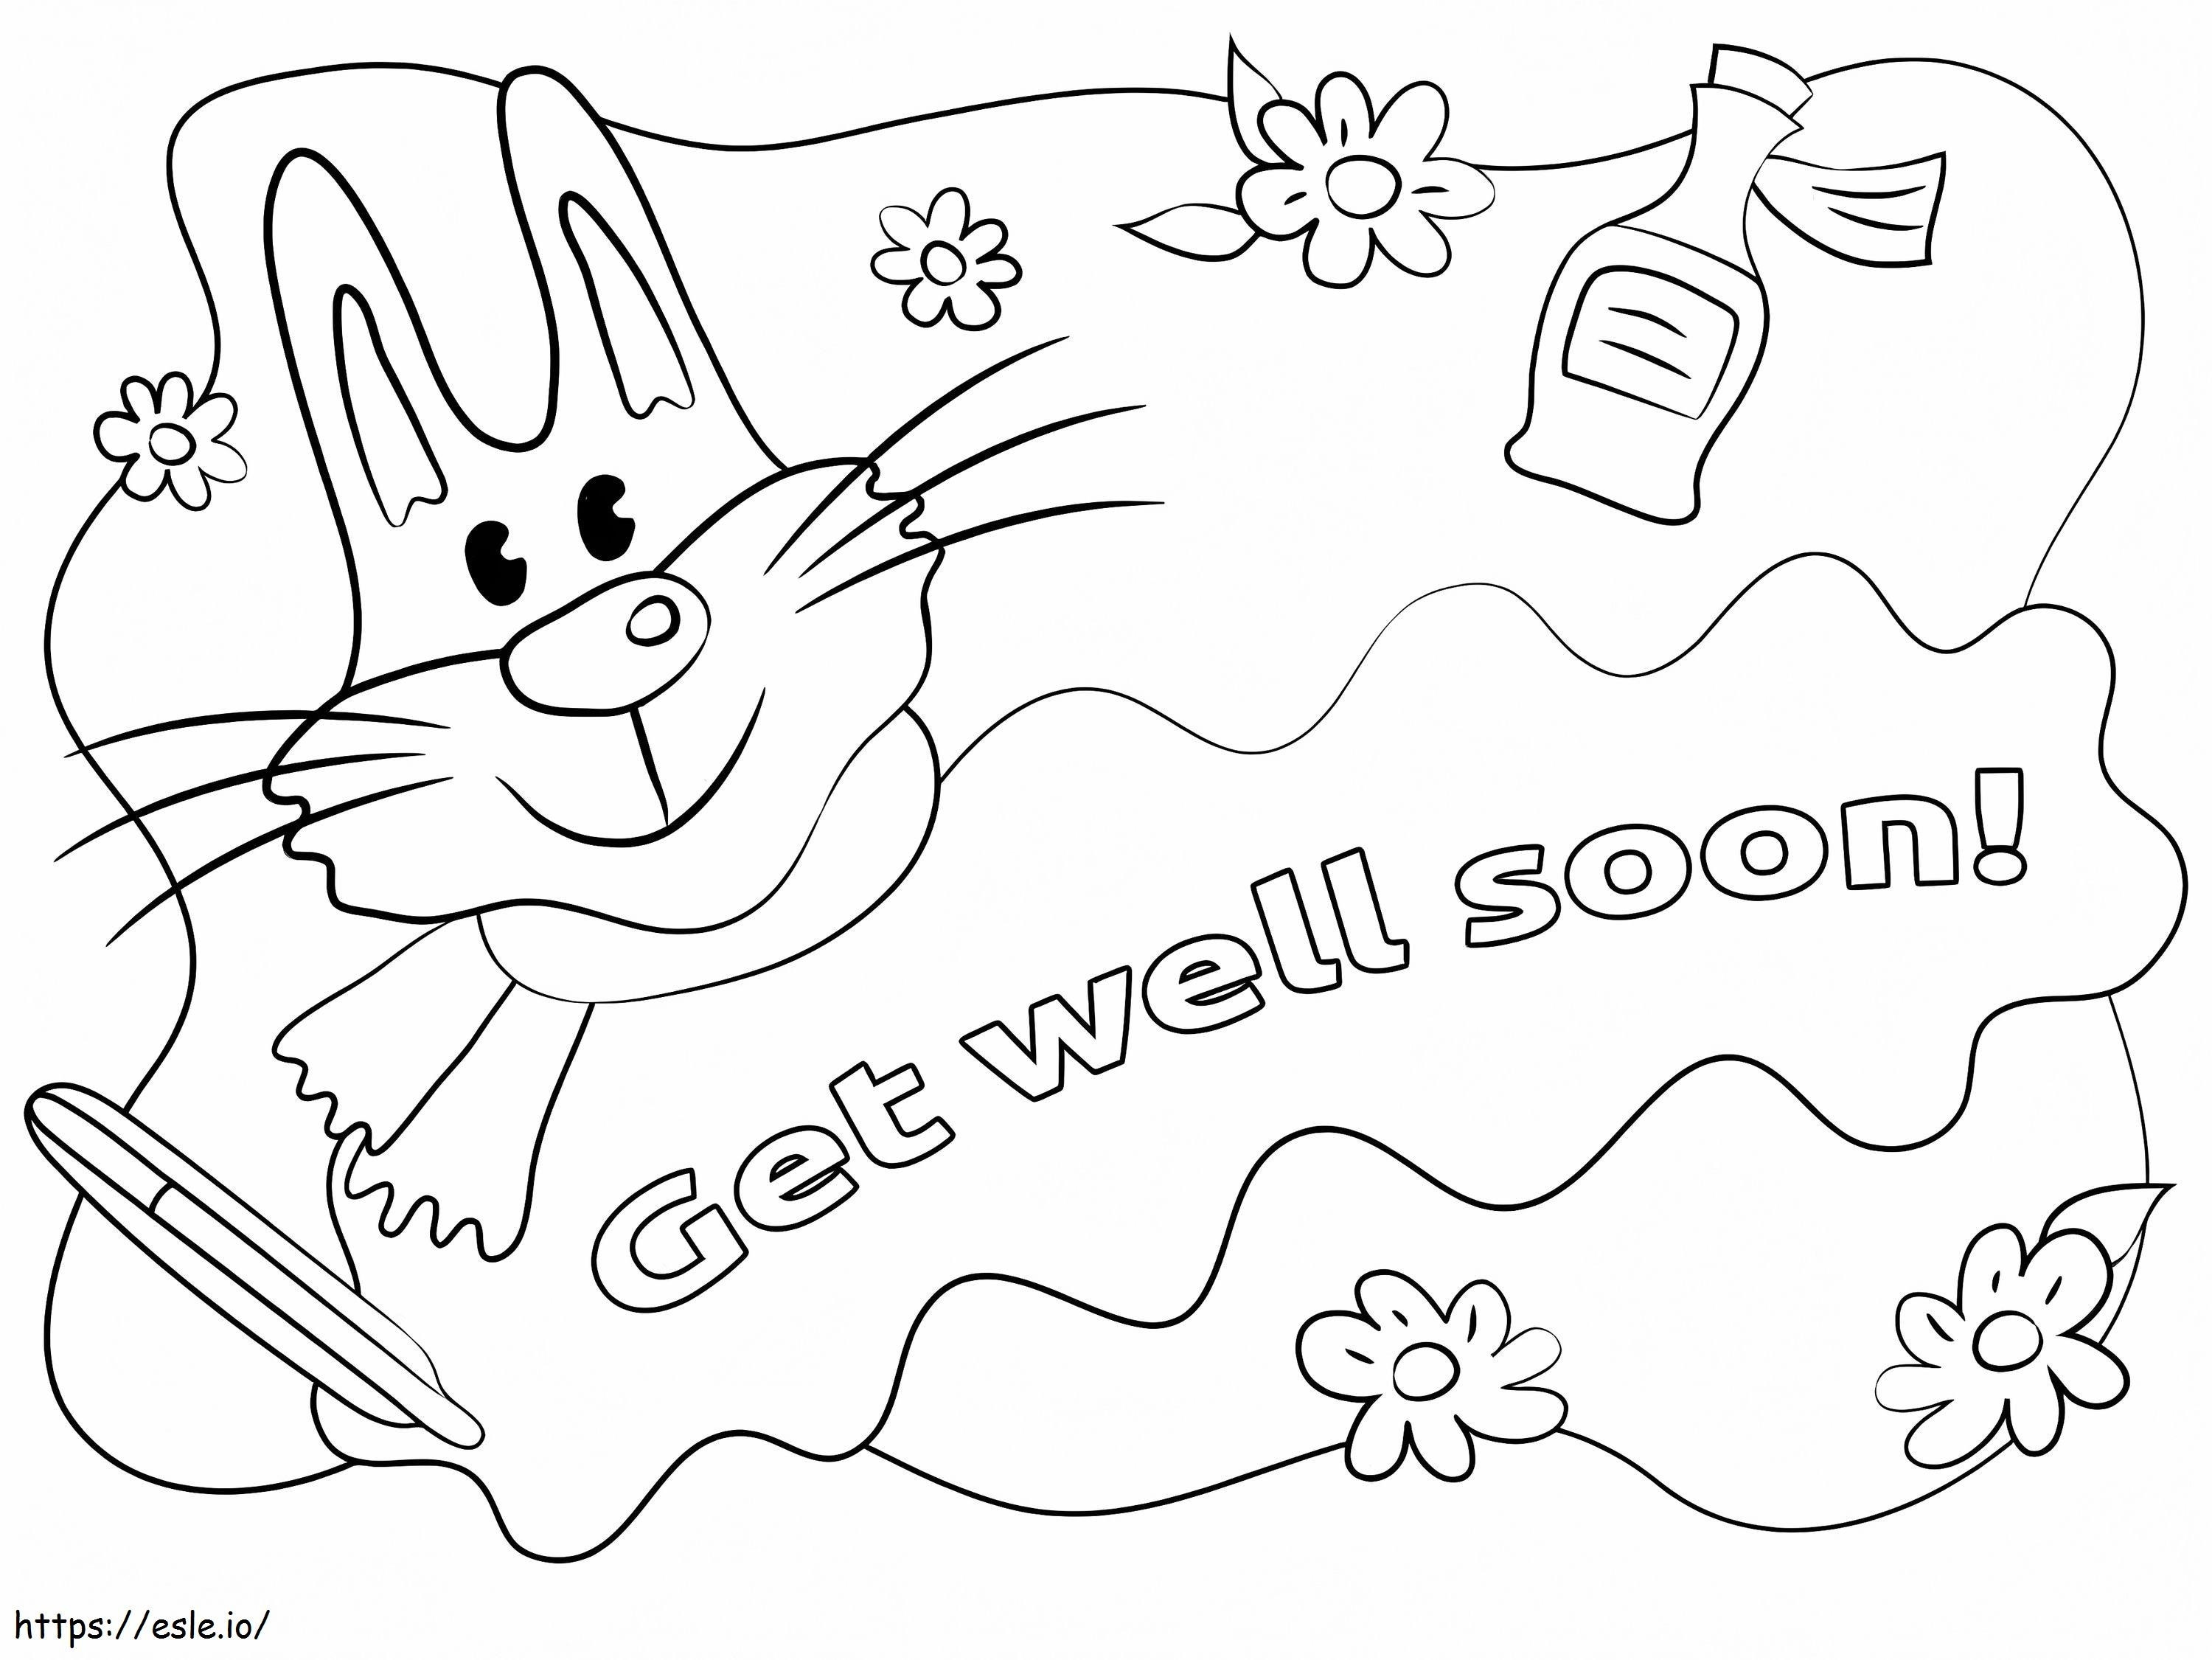 Get Well Soon Rabbit coloring page